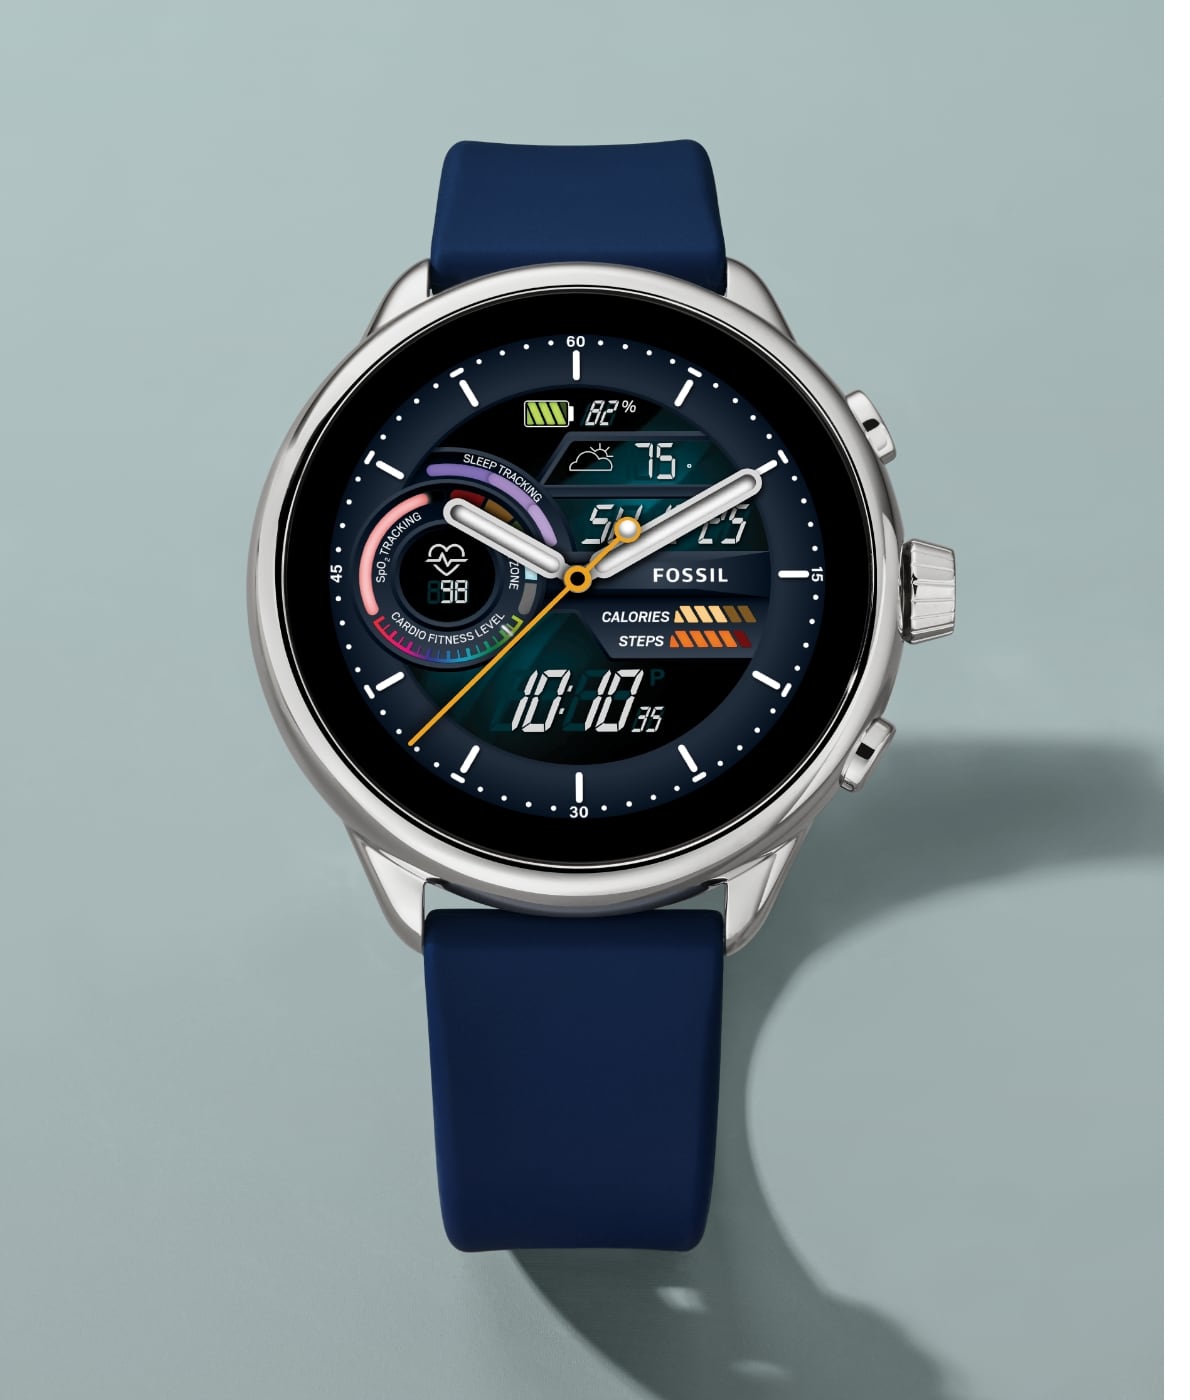 Fossil Q Crewmaster Hybrid Review: All The Smartwatch You Need